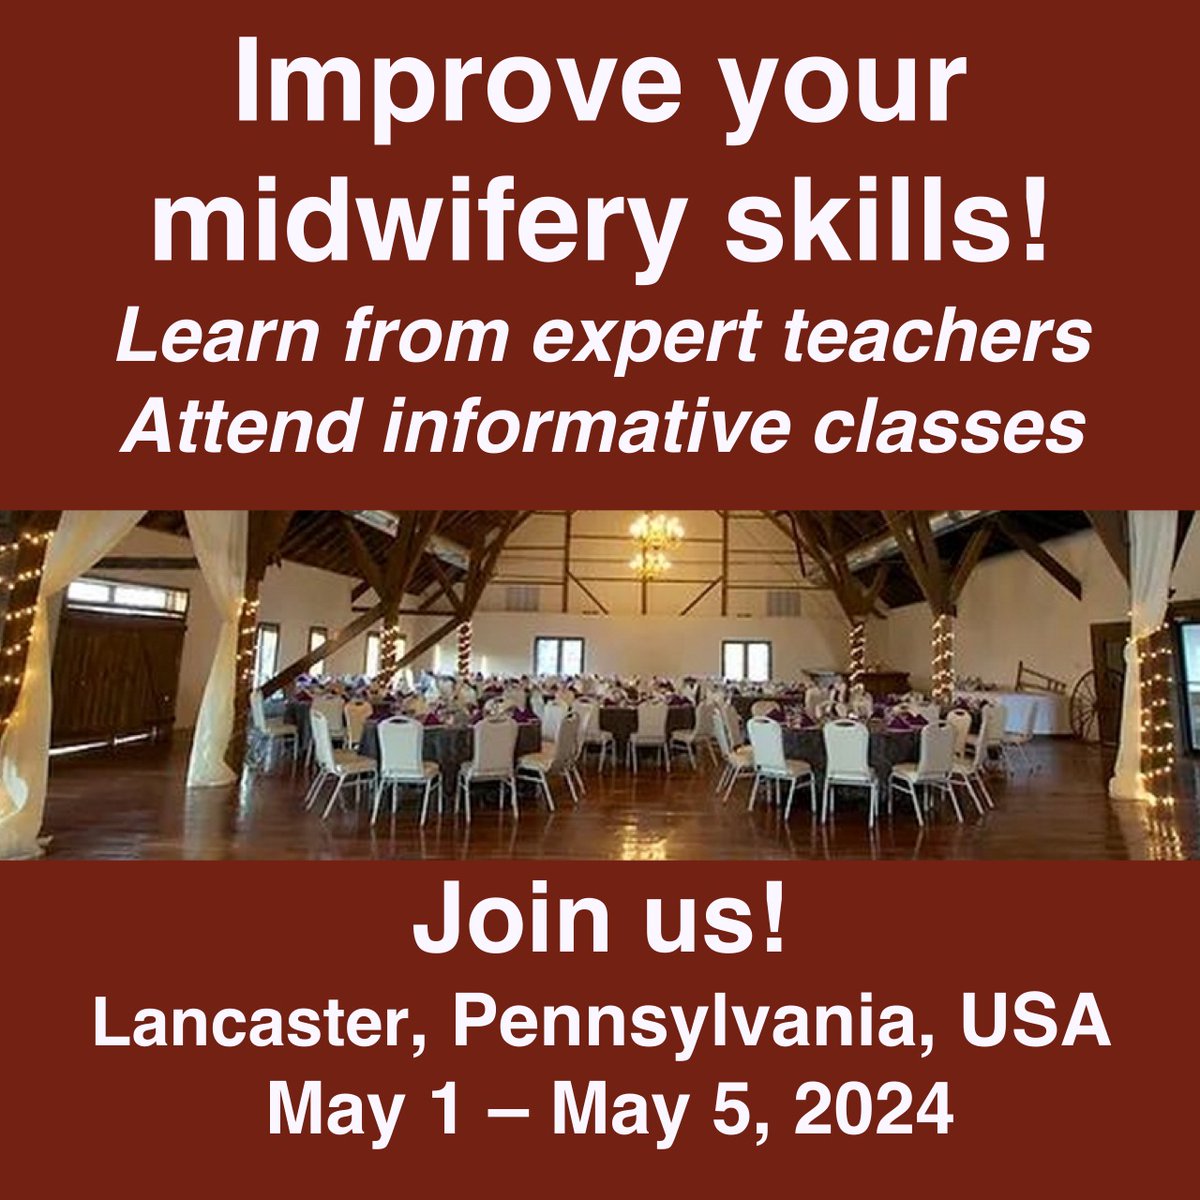 Everyone is welcome at the Midwifery Today conference in Lancaster, Pennsylvania, May 1–5 midwiferytoday.com/conference/lan…